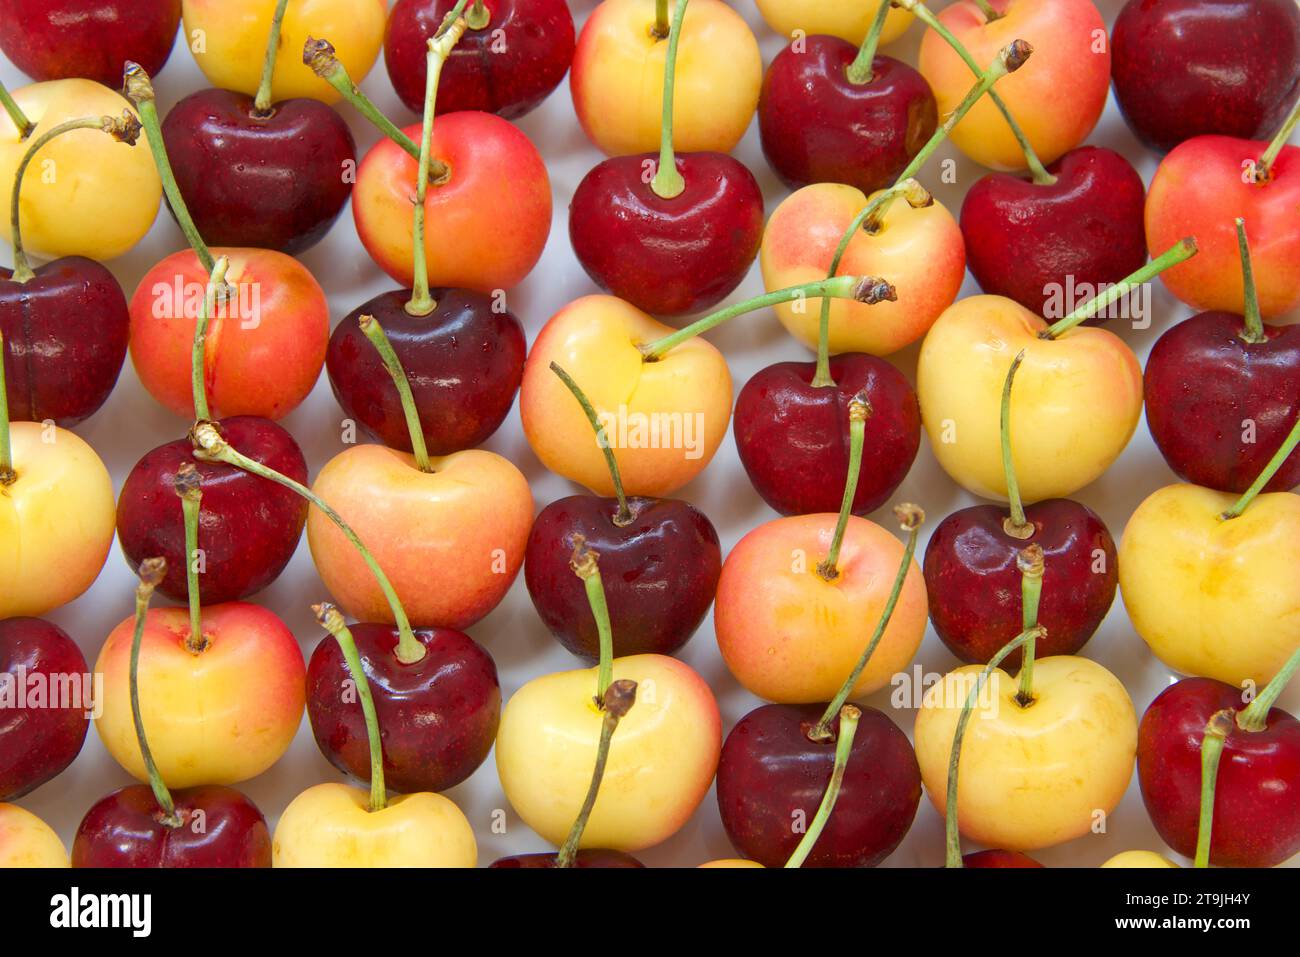 Top view of Bing Cherries and Rainier Cherries with stems lined up on a porcelain plate. Fresh seasonal fruit. Stock Photo